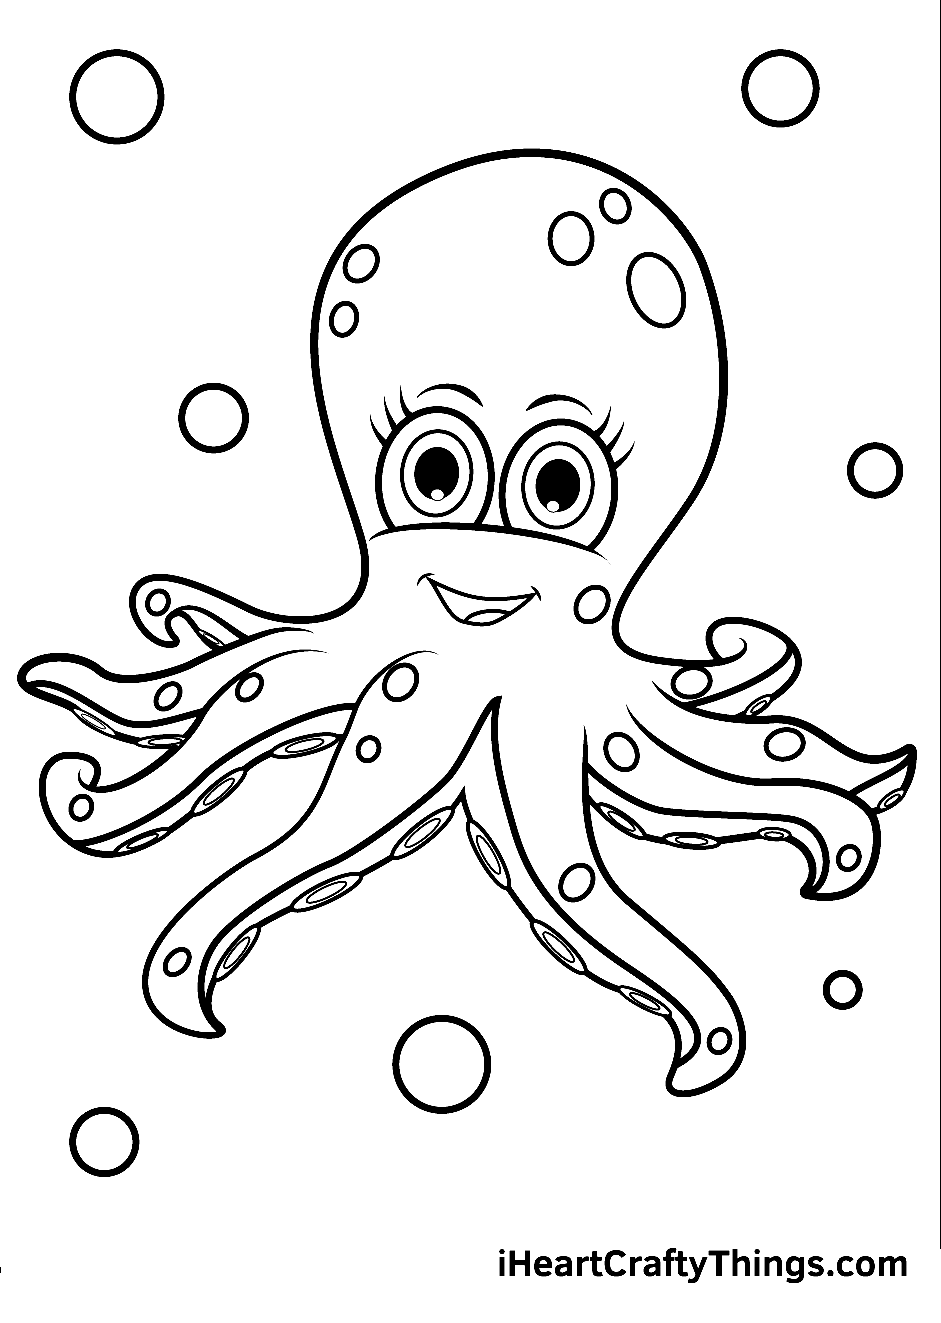 Smiling Octopus Coloring Page